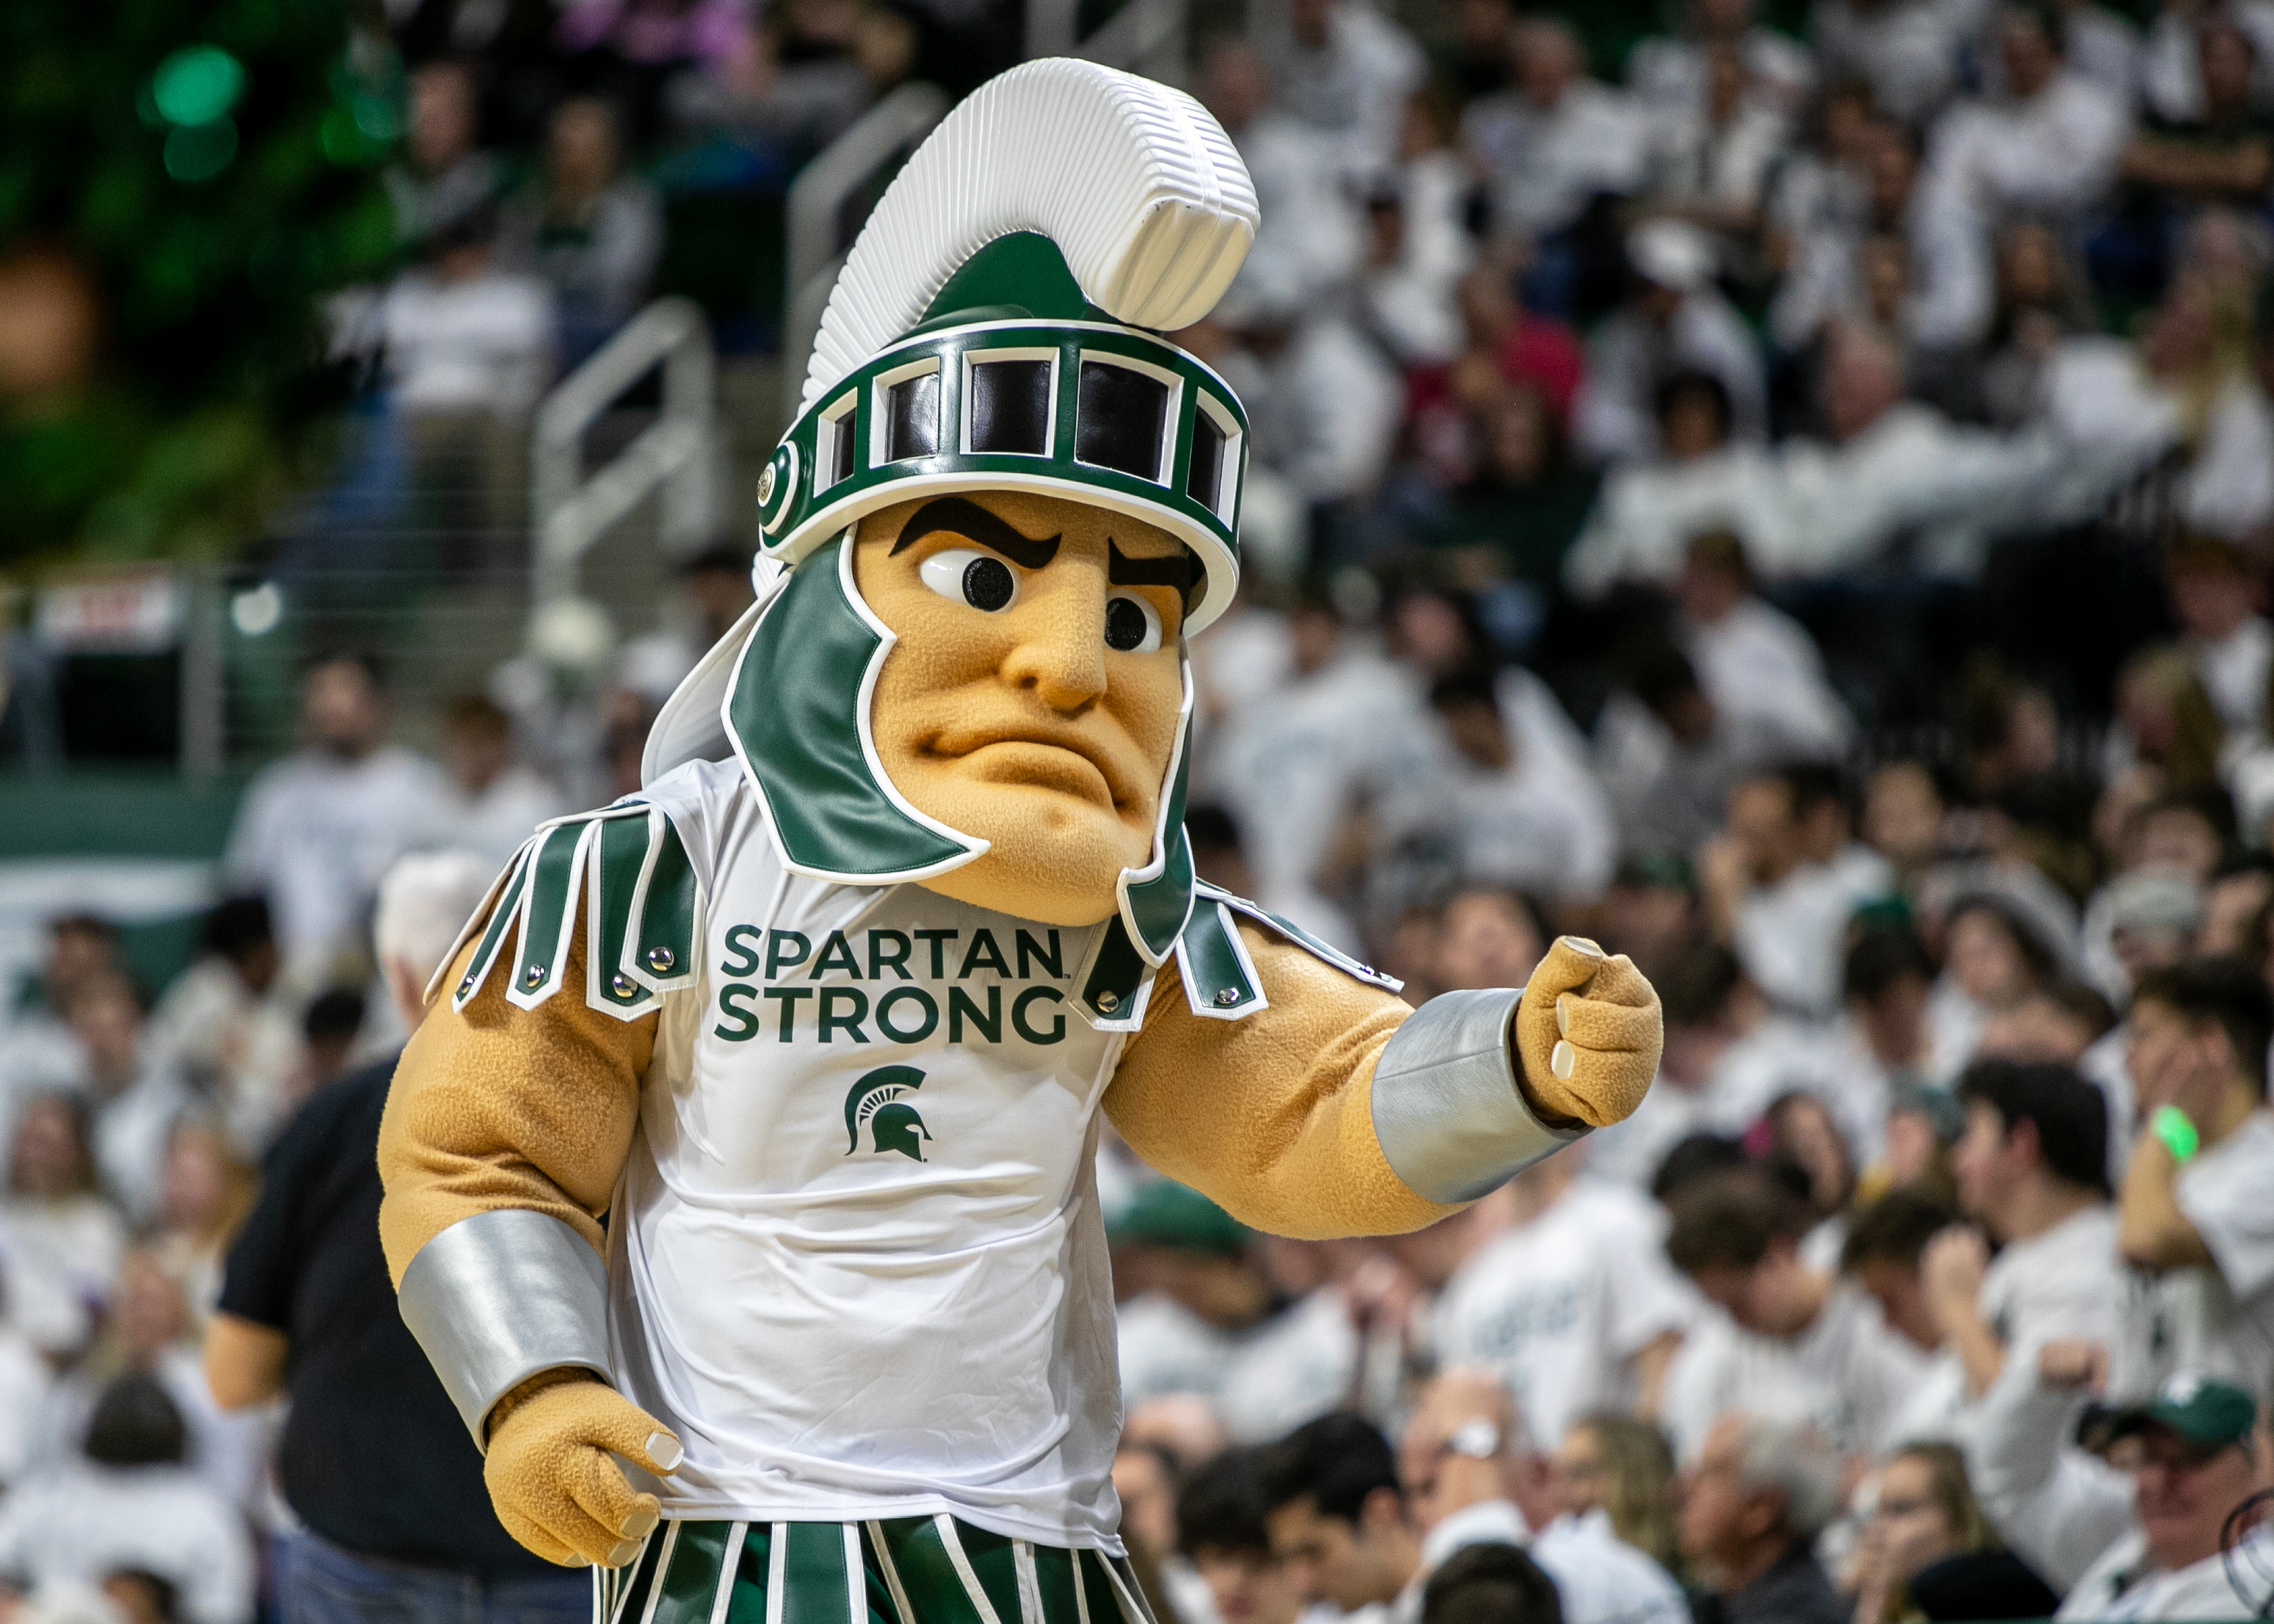 AG, MSU of scams for 'Spartan Strong' merchandise - mlive.com